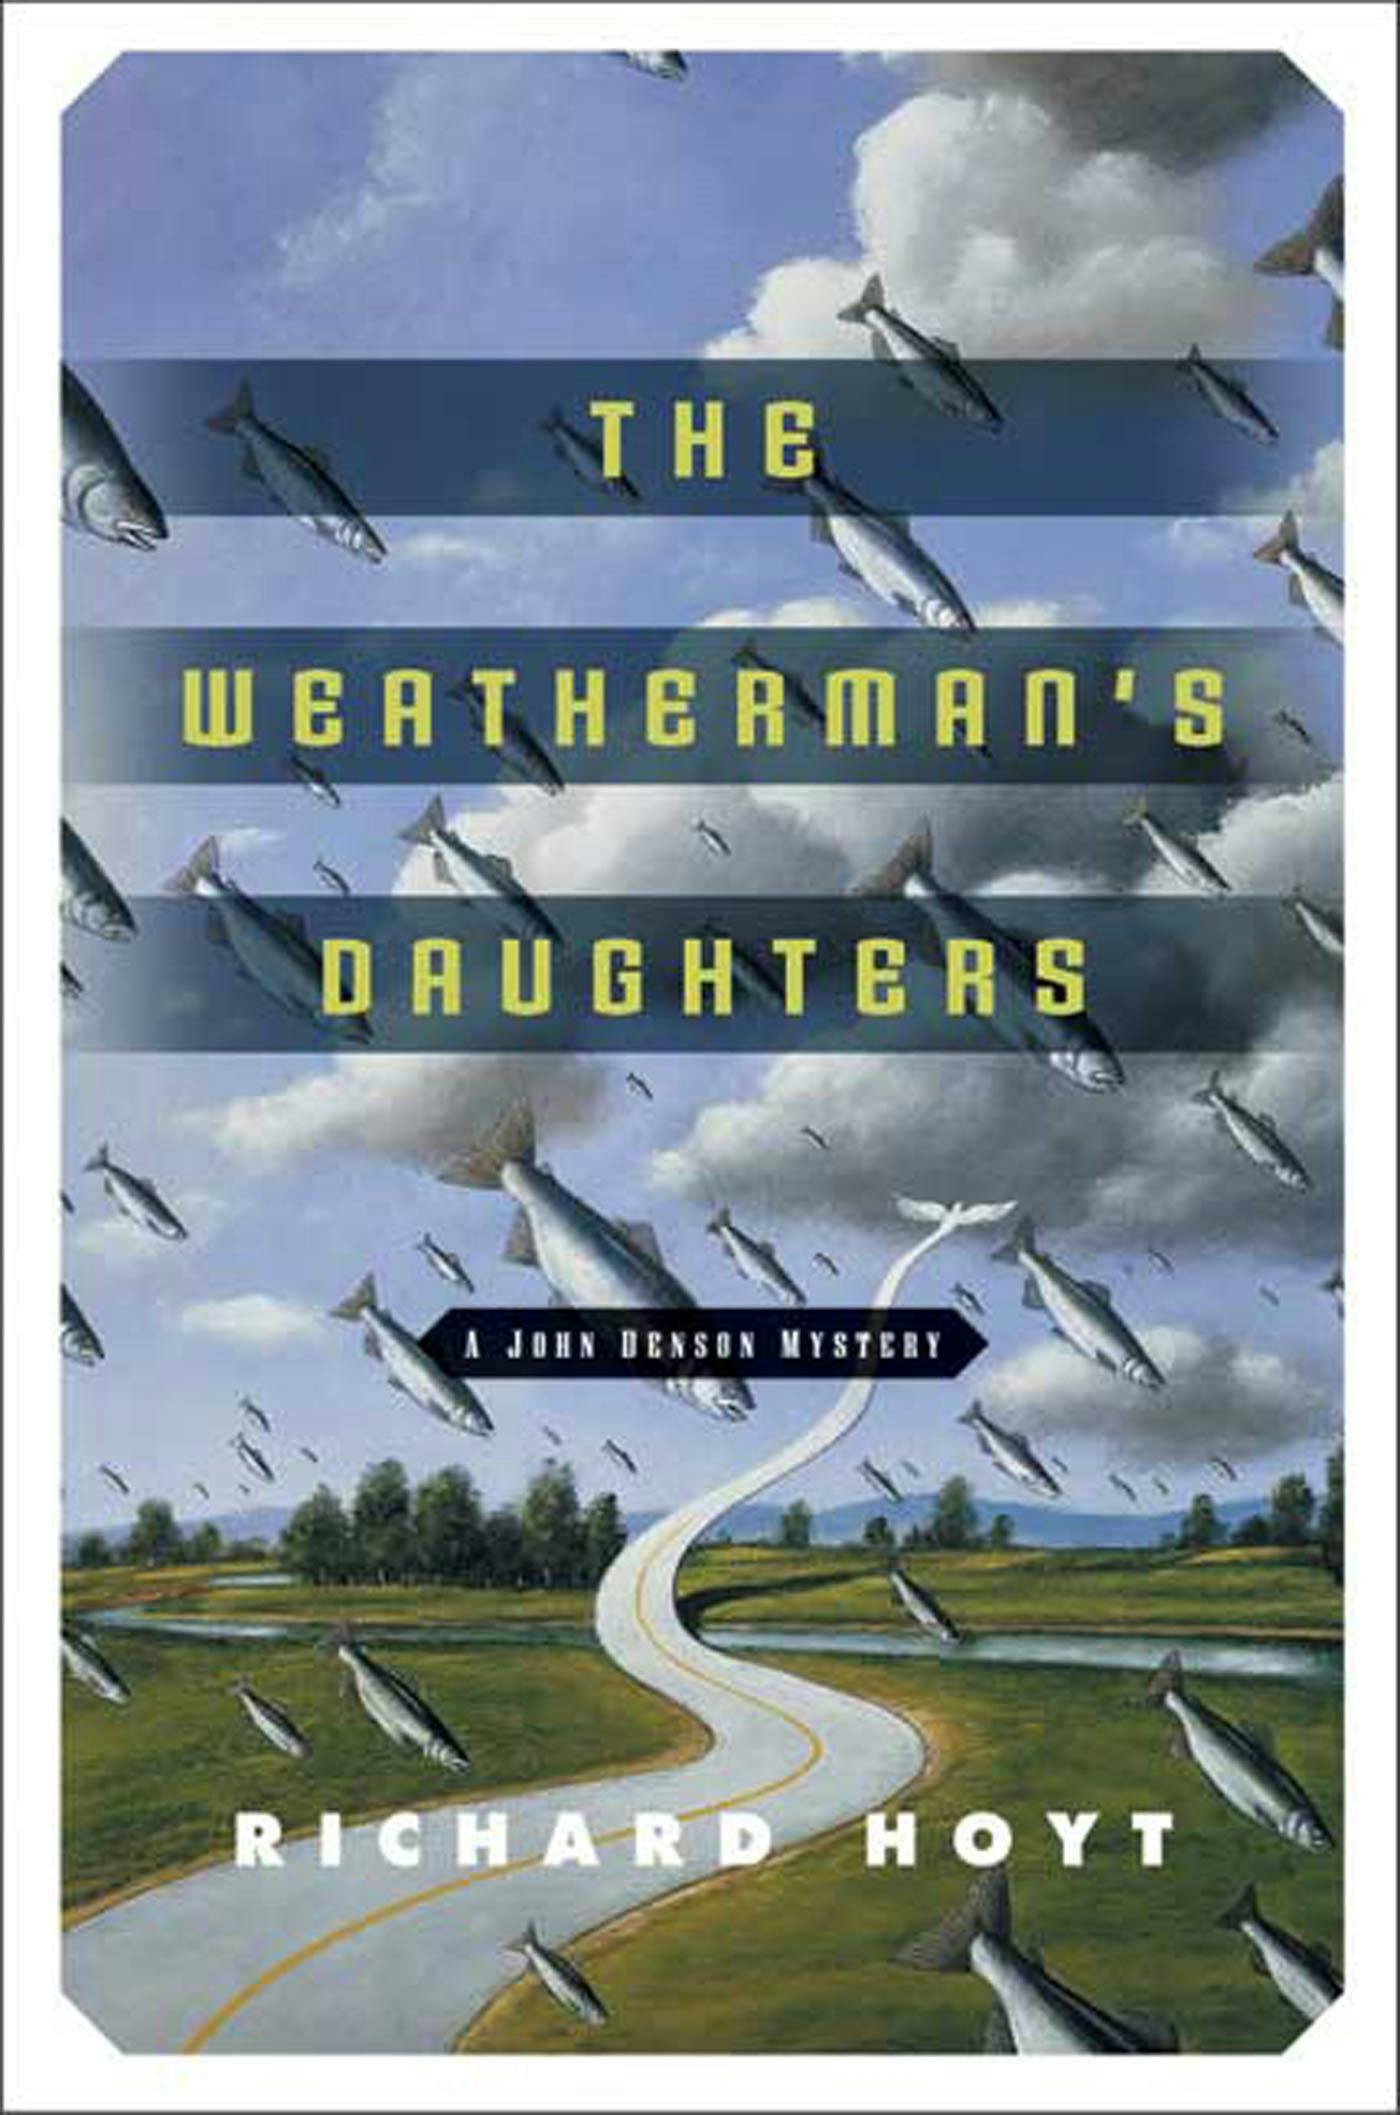 Cover for the book titled as: The Weatherman's Daughters